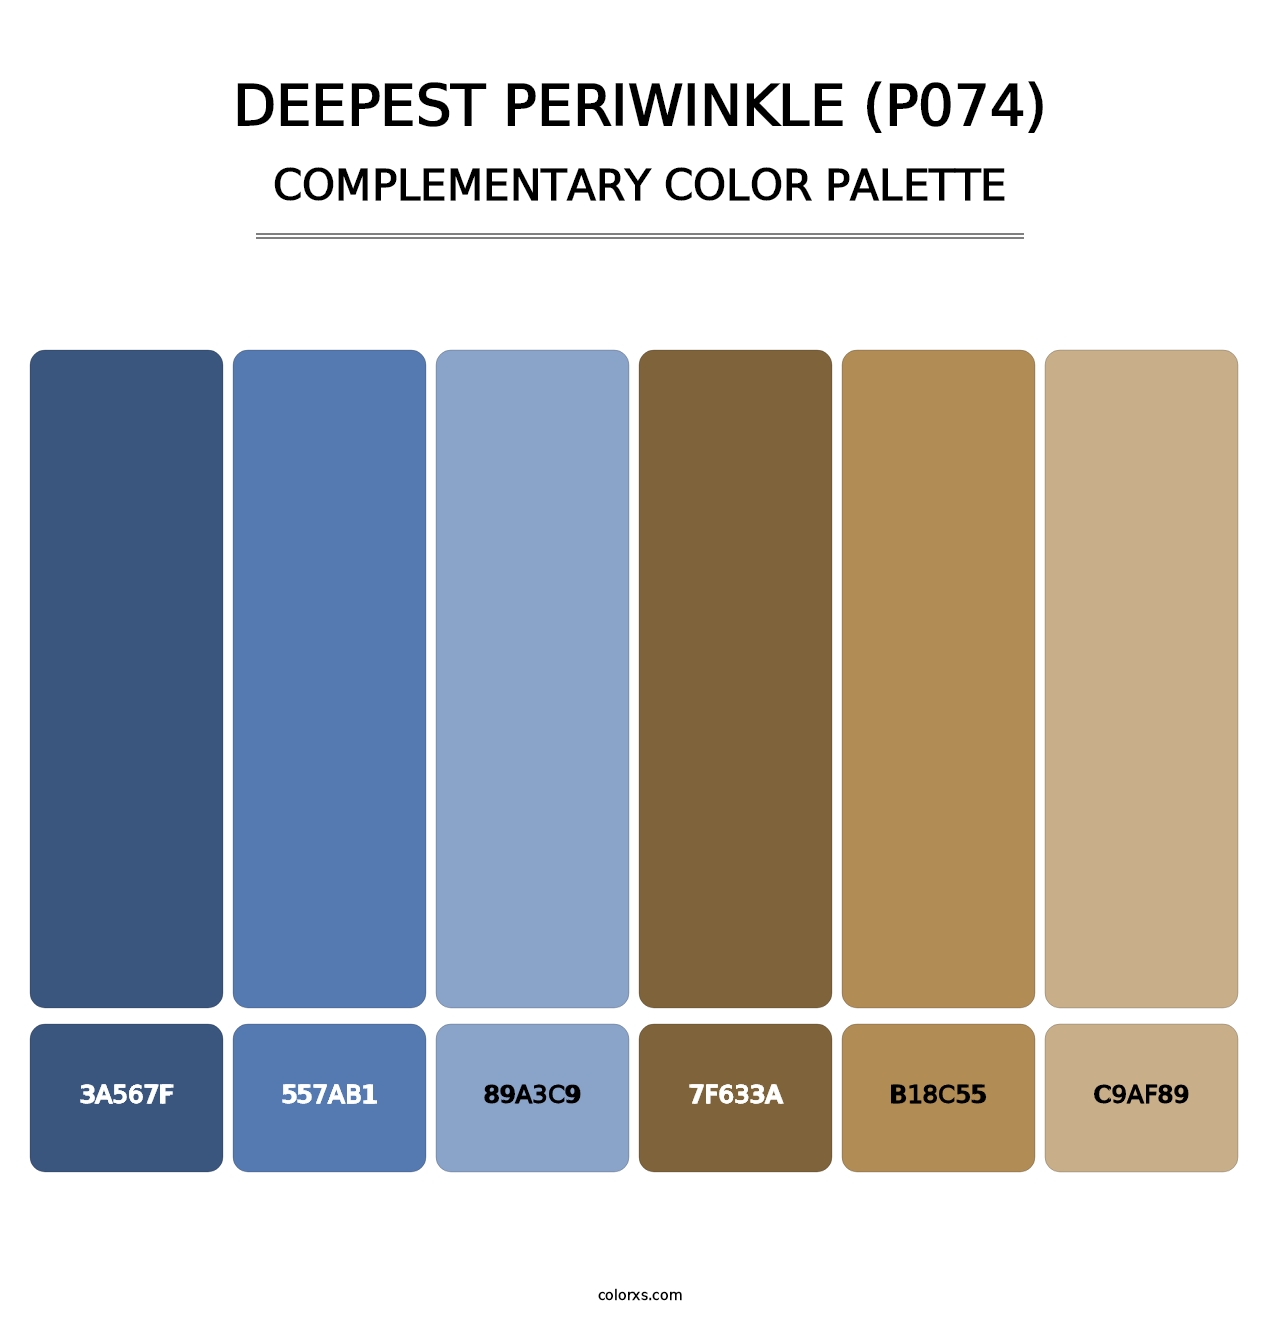 Deepest Periwinkle (P074) - Complementary Color Palette